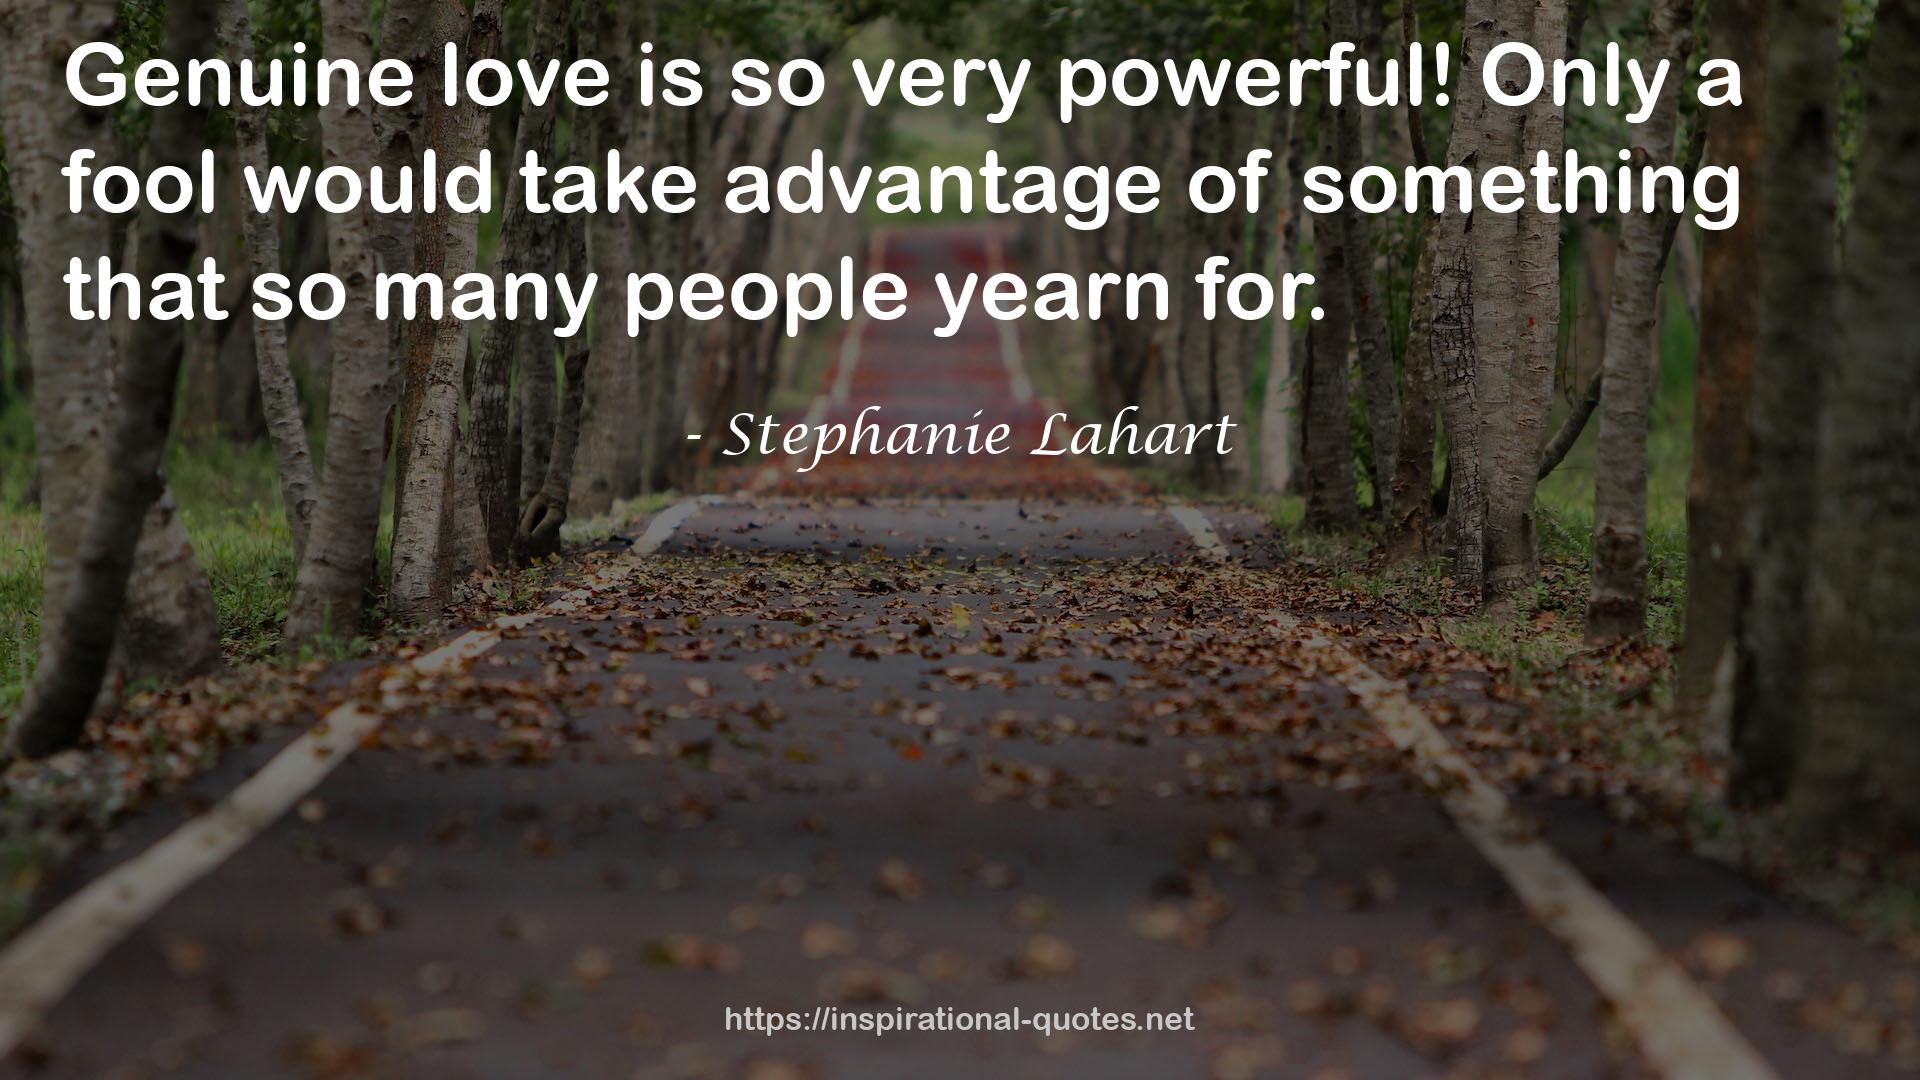 Stephanie Lahart quote : Genuine love is so very powerful! Only a fool would take advantage of something that so many people yearn for.